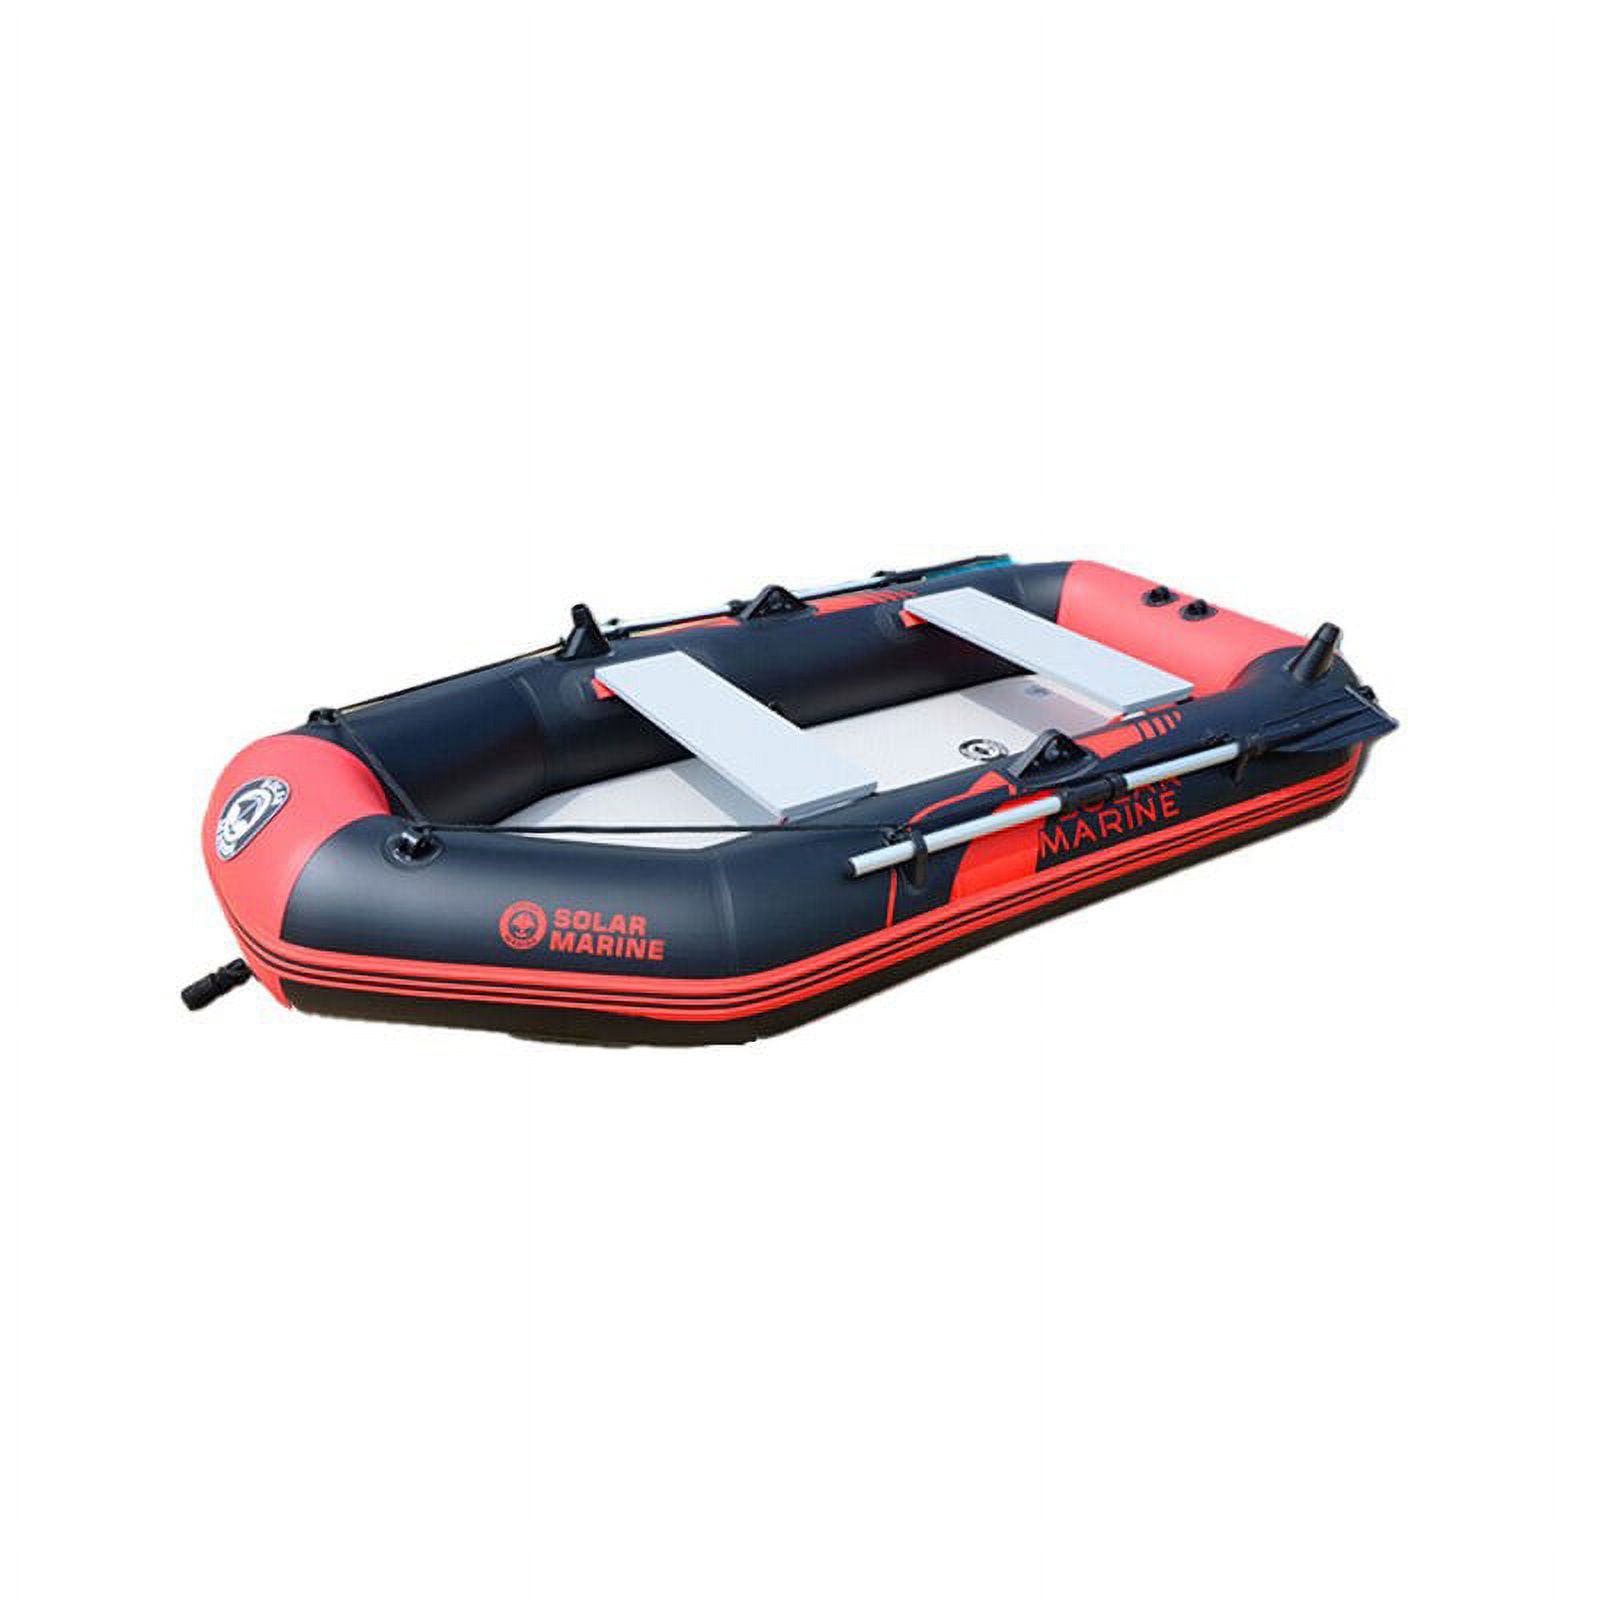 2.6 M 3 Person PVC Portable Inflatable Boat Fishing Kayak Canoe Dinghy Set with Accessories Water Sports - image 3 of 6